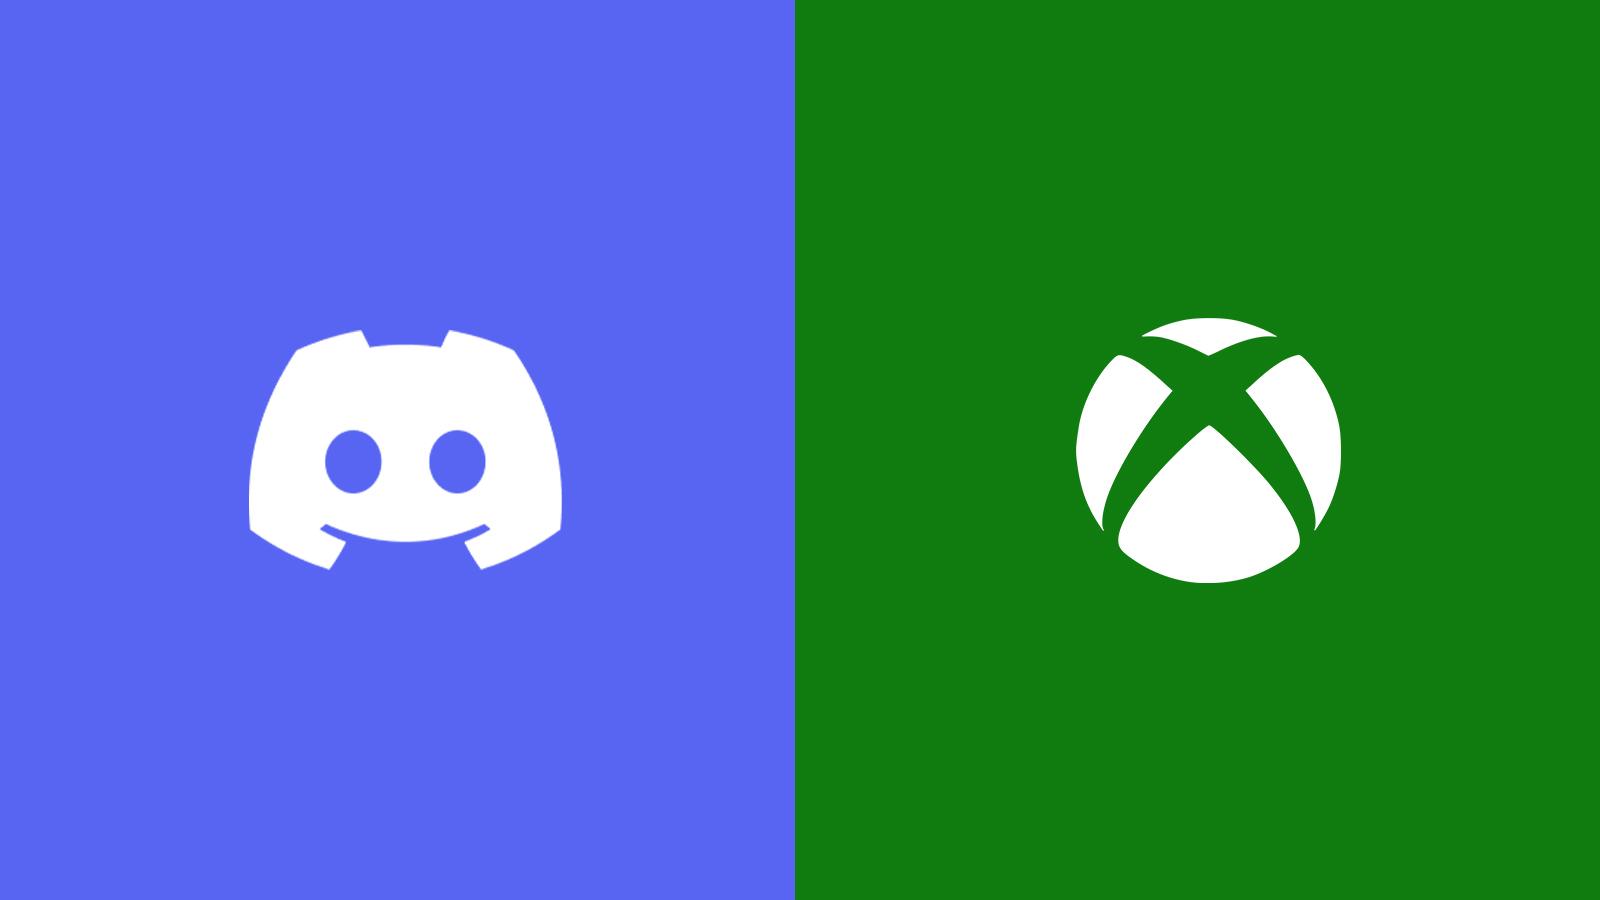 You can join Discord channel from Xbox Series S/X console now